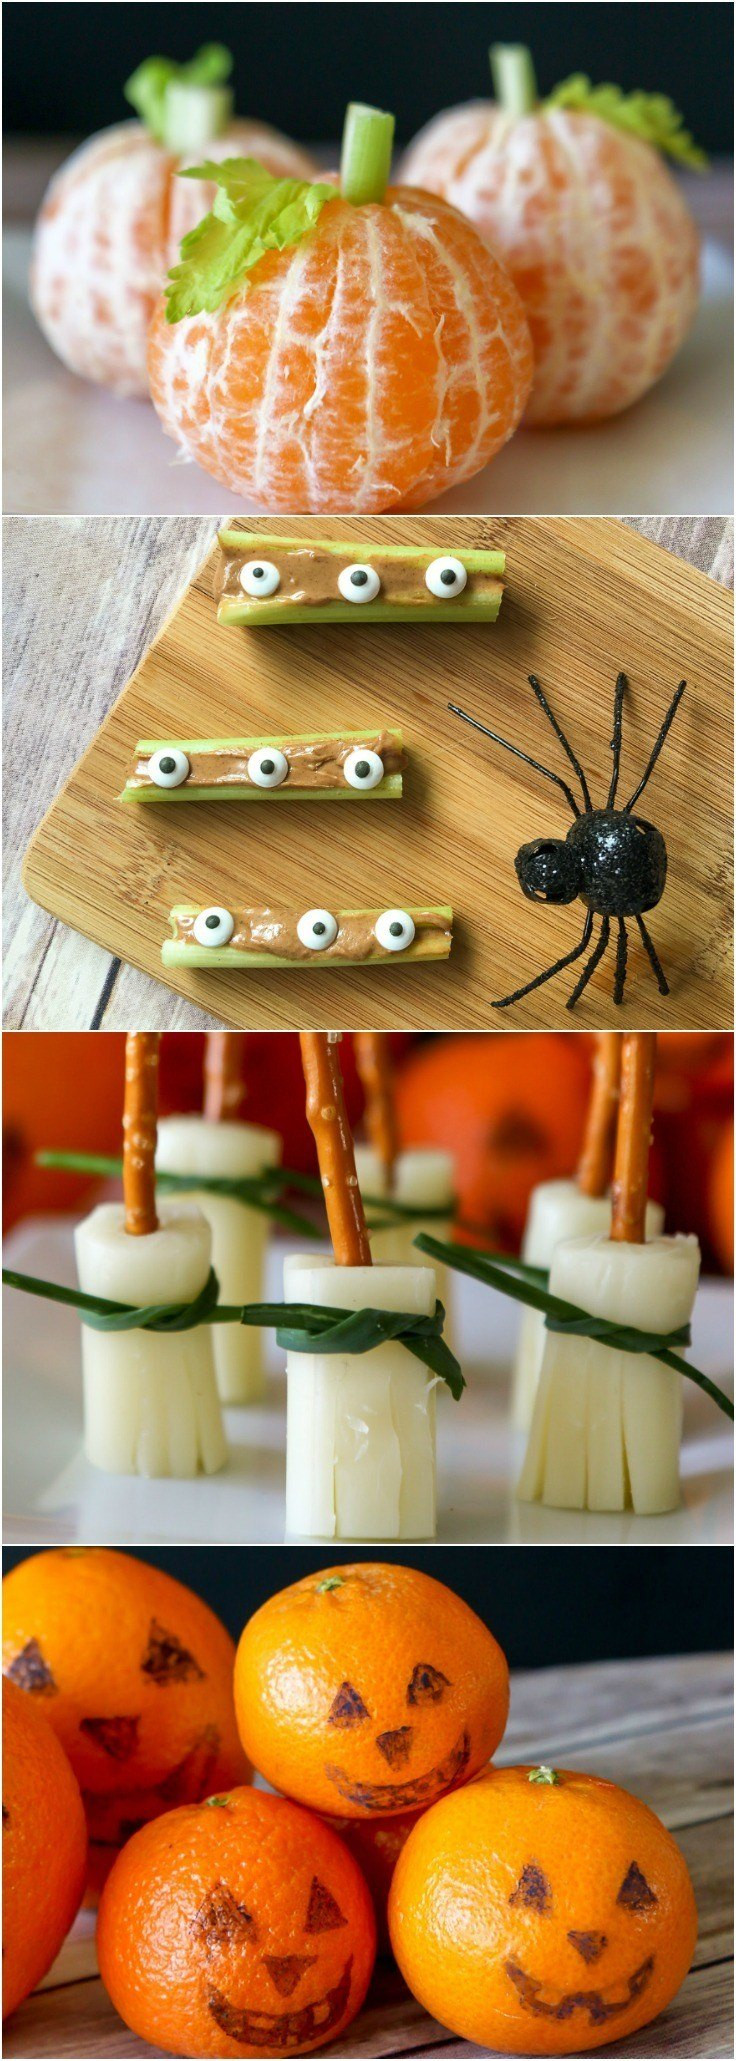 Healthy Halloween Party Snacks
 5 Easy & Healthy Halloween Snacks for Kids Recipes They